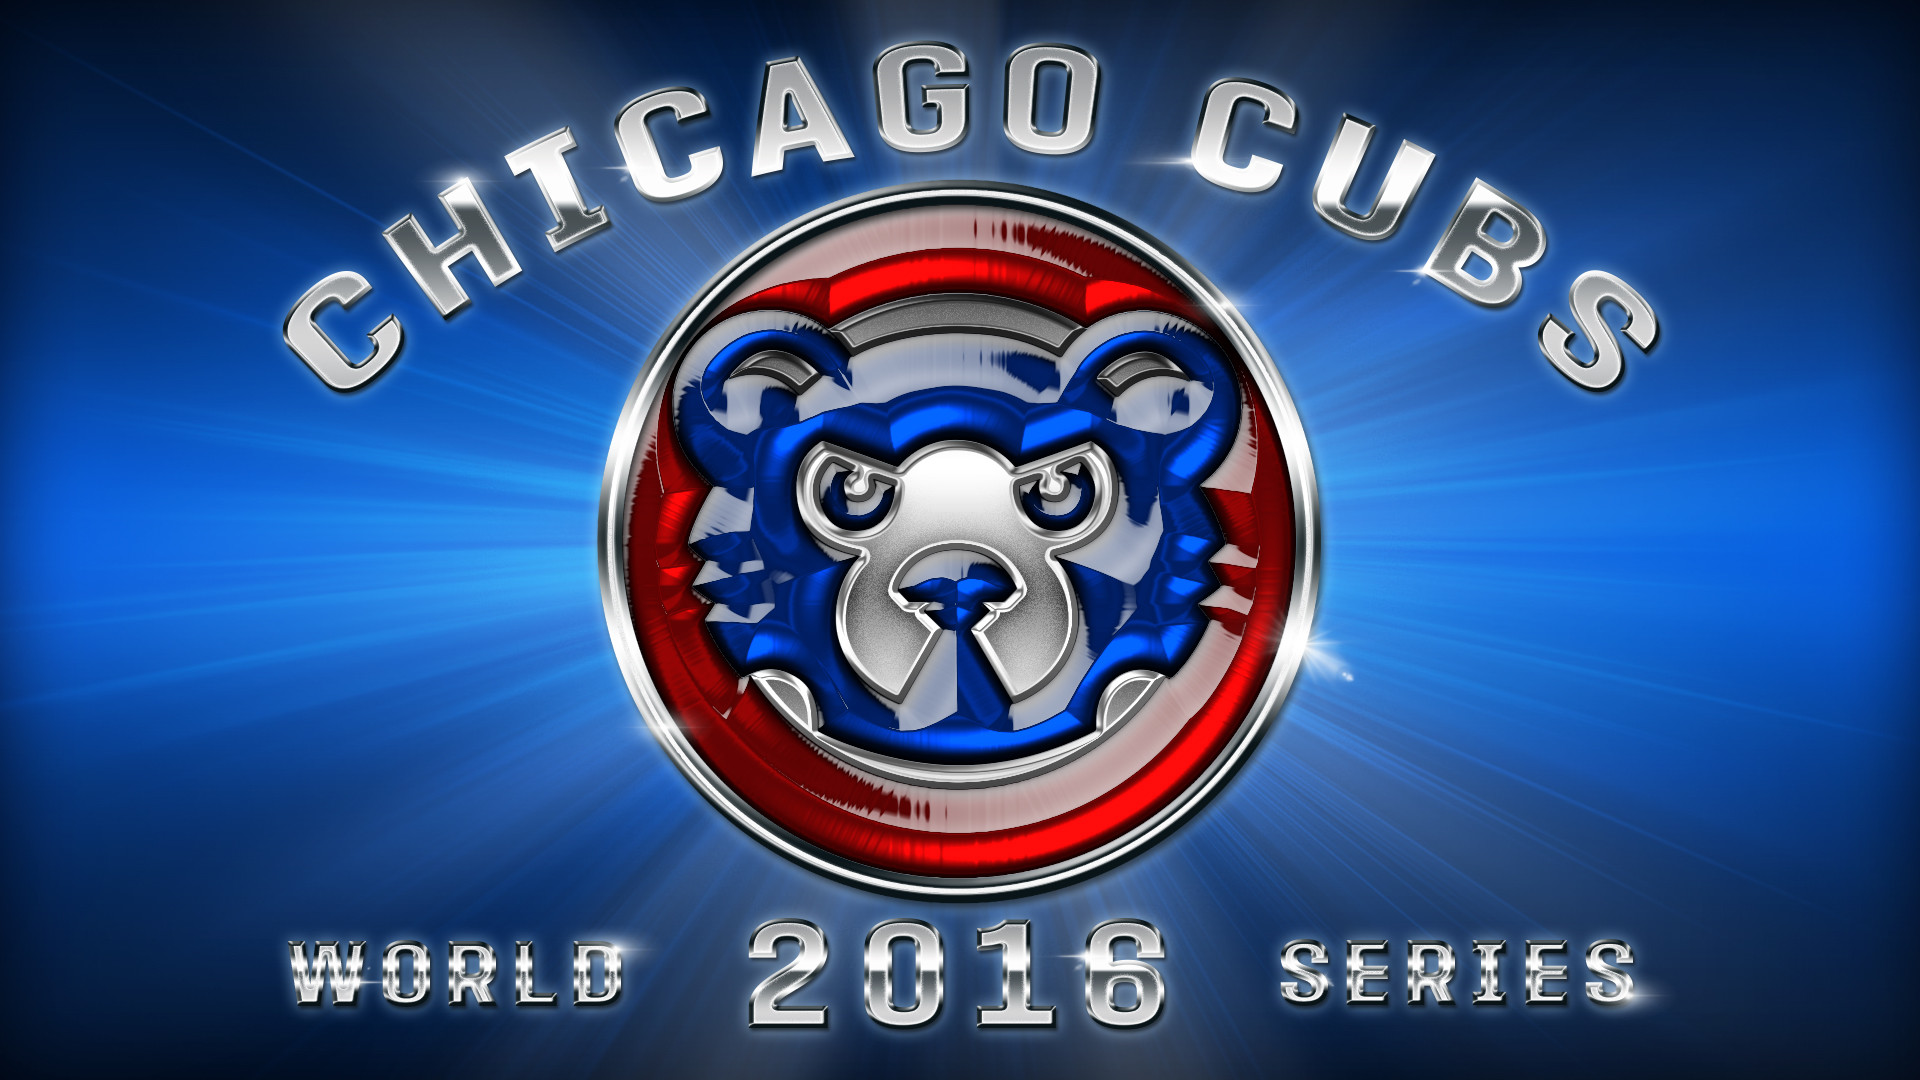 1920x1080 Best Chicago Cubs Wallpaper Logos Graphic | VectoRealy